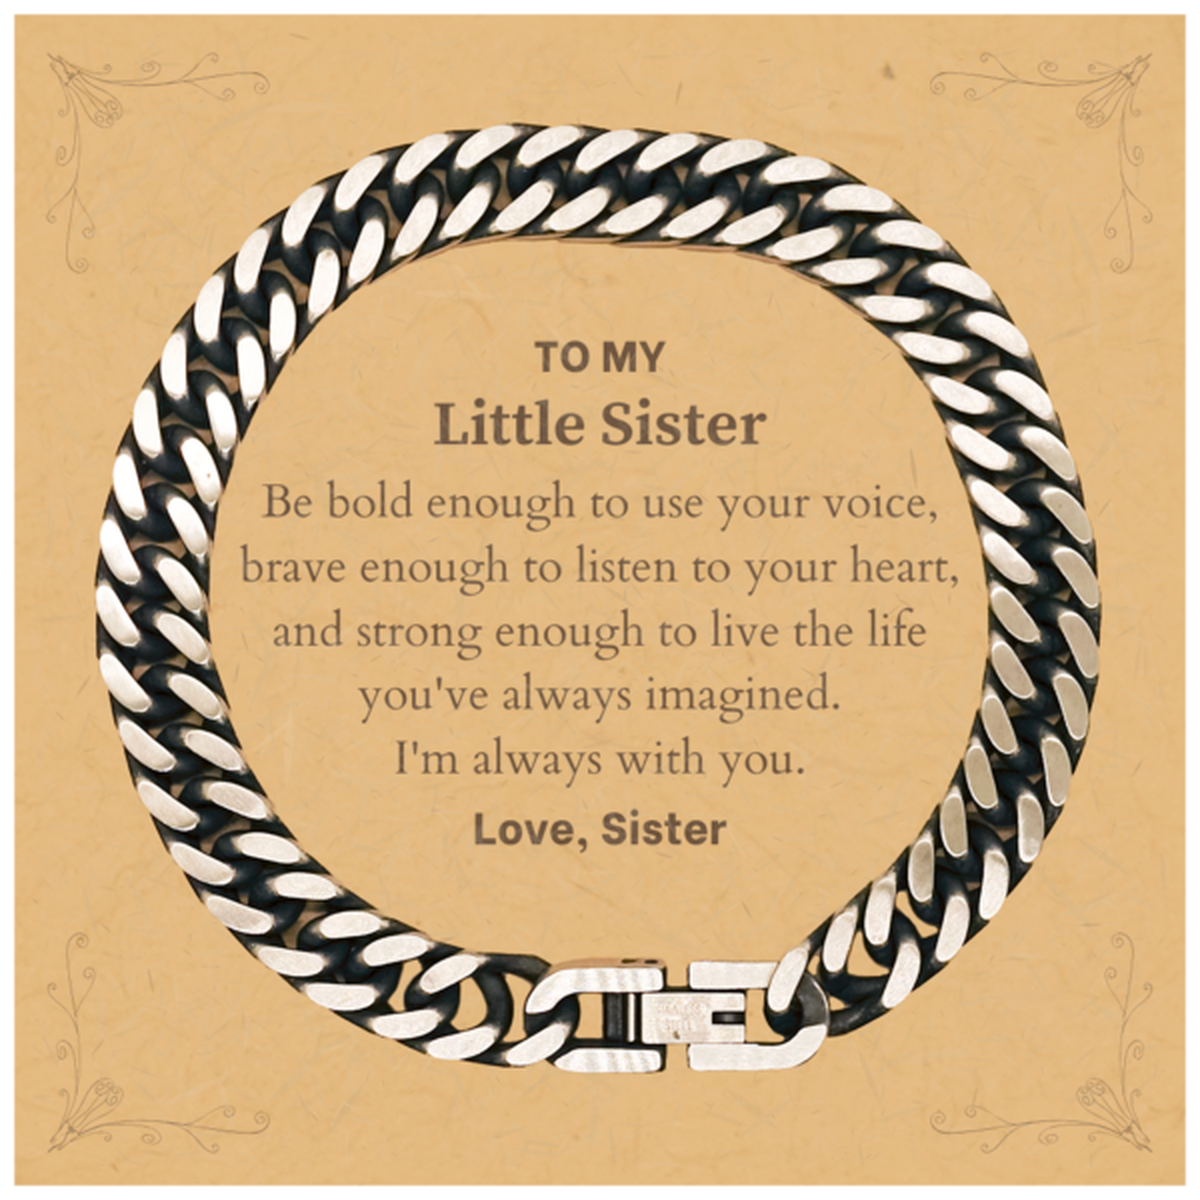 Keepsake Little Sister Cuban Link Chain Bracelet Gift Idea Graduation Christmas Birthday Little Sister from Sister, Little Sister Be bold enough to use your voice, brave enough to listen to your heart. Love, Sister